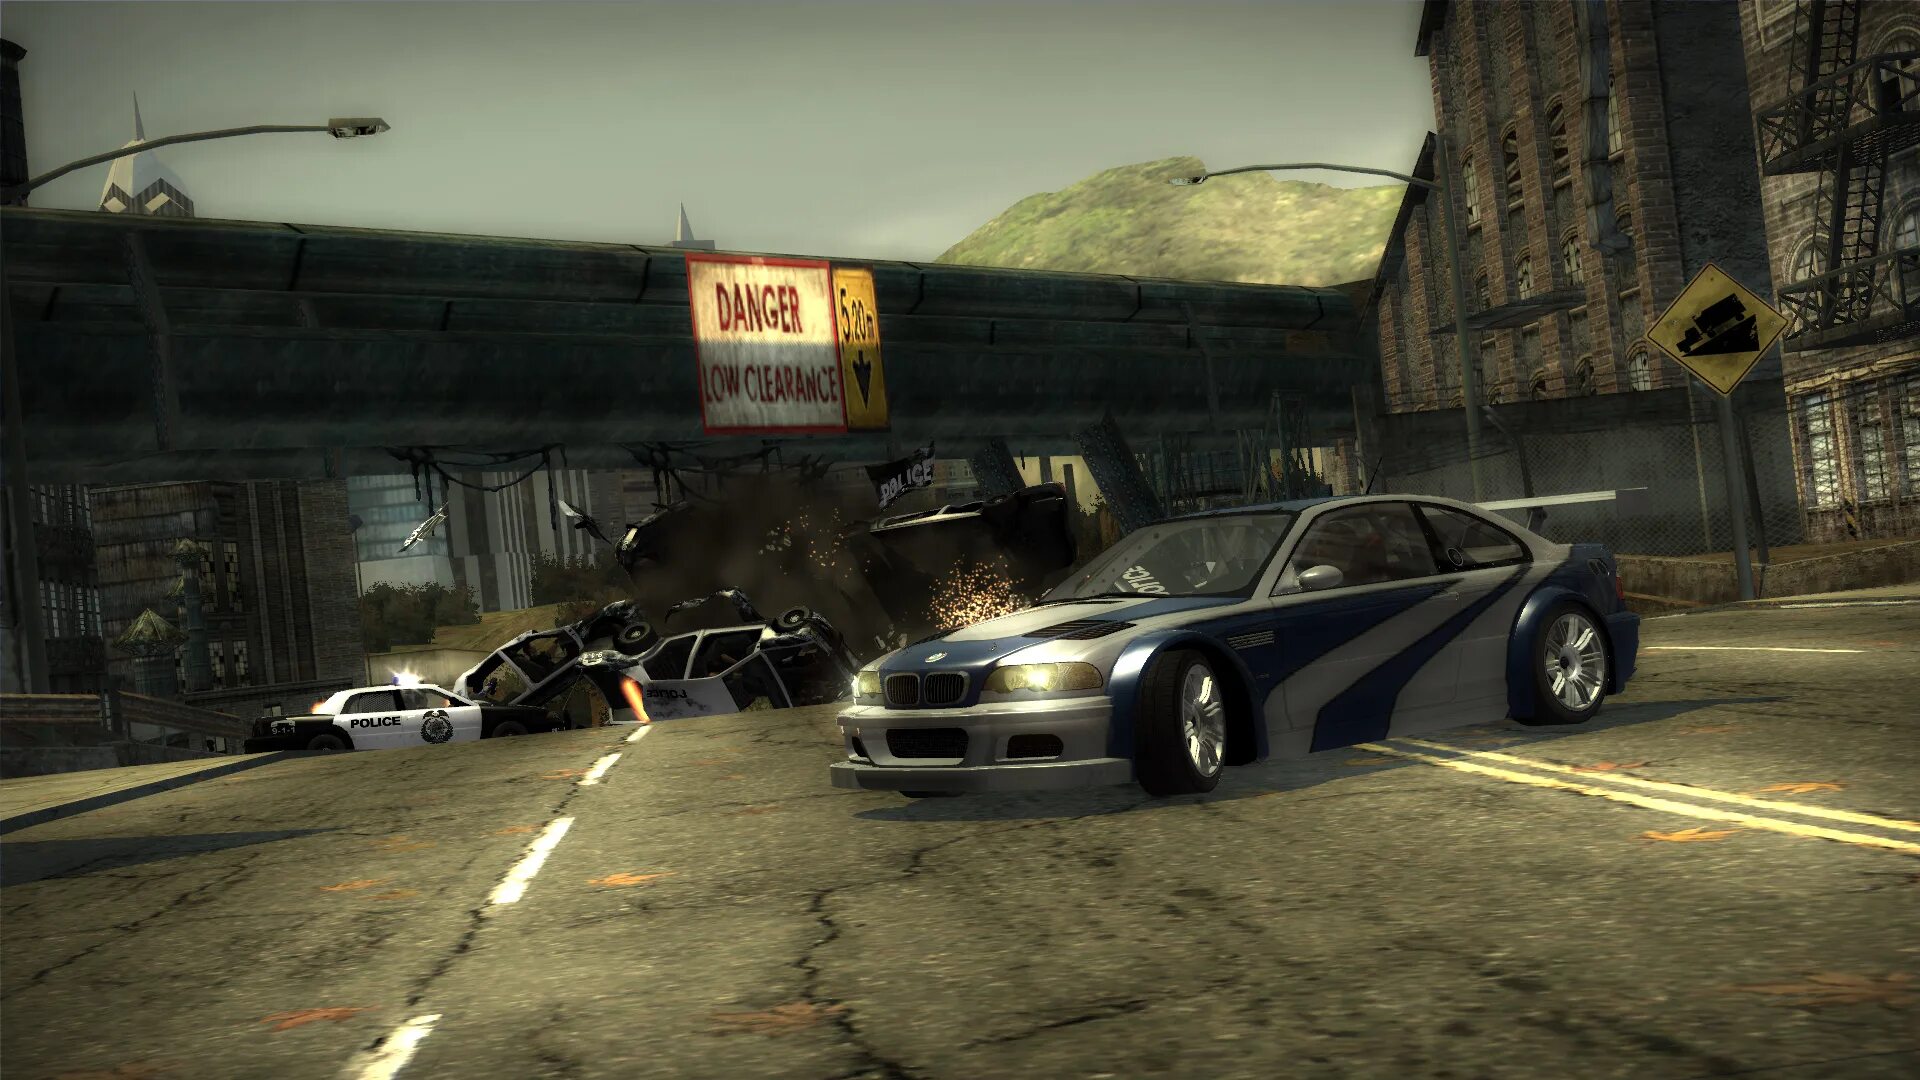 Бета NFS MW 2005. Гонки NFS most wanted 2005. NFS MW 2005 ps2. Новый NFS most wanted 2005. Demo more